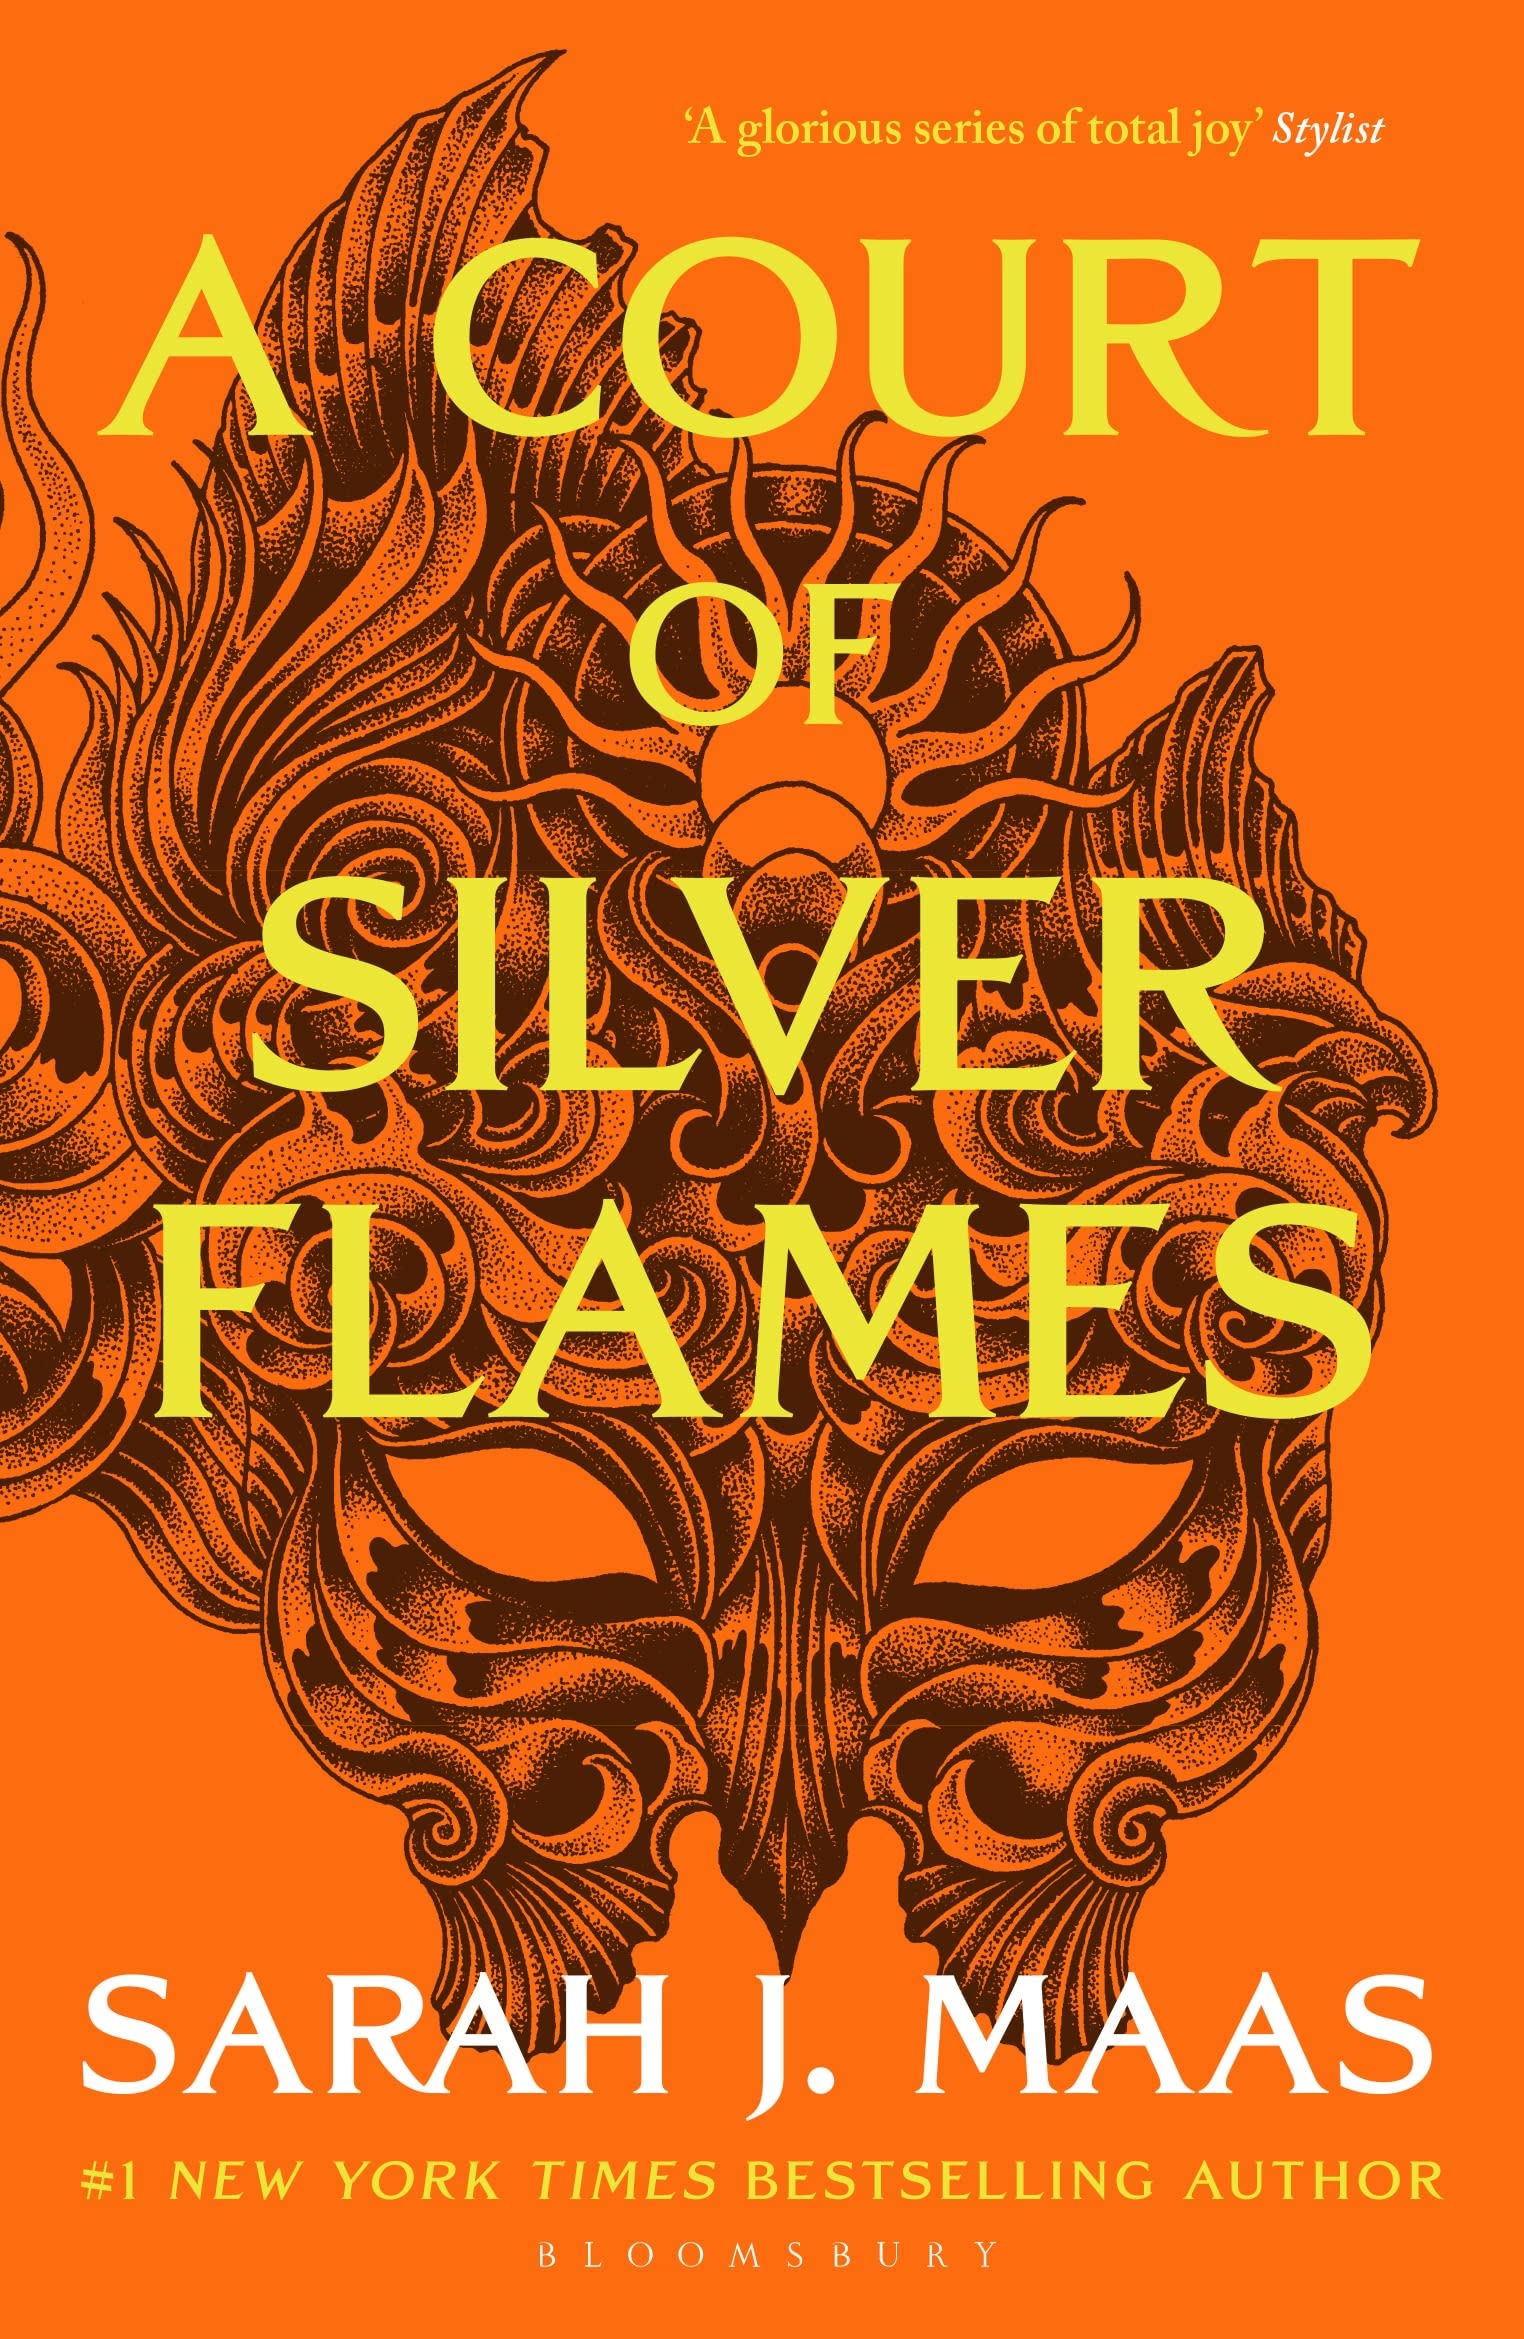 A Court of Thorns and Roses 4: a Court of Silver Flames